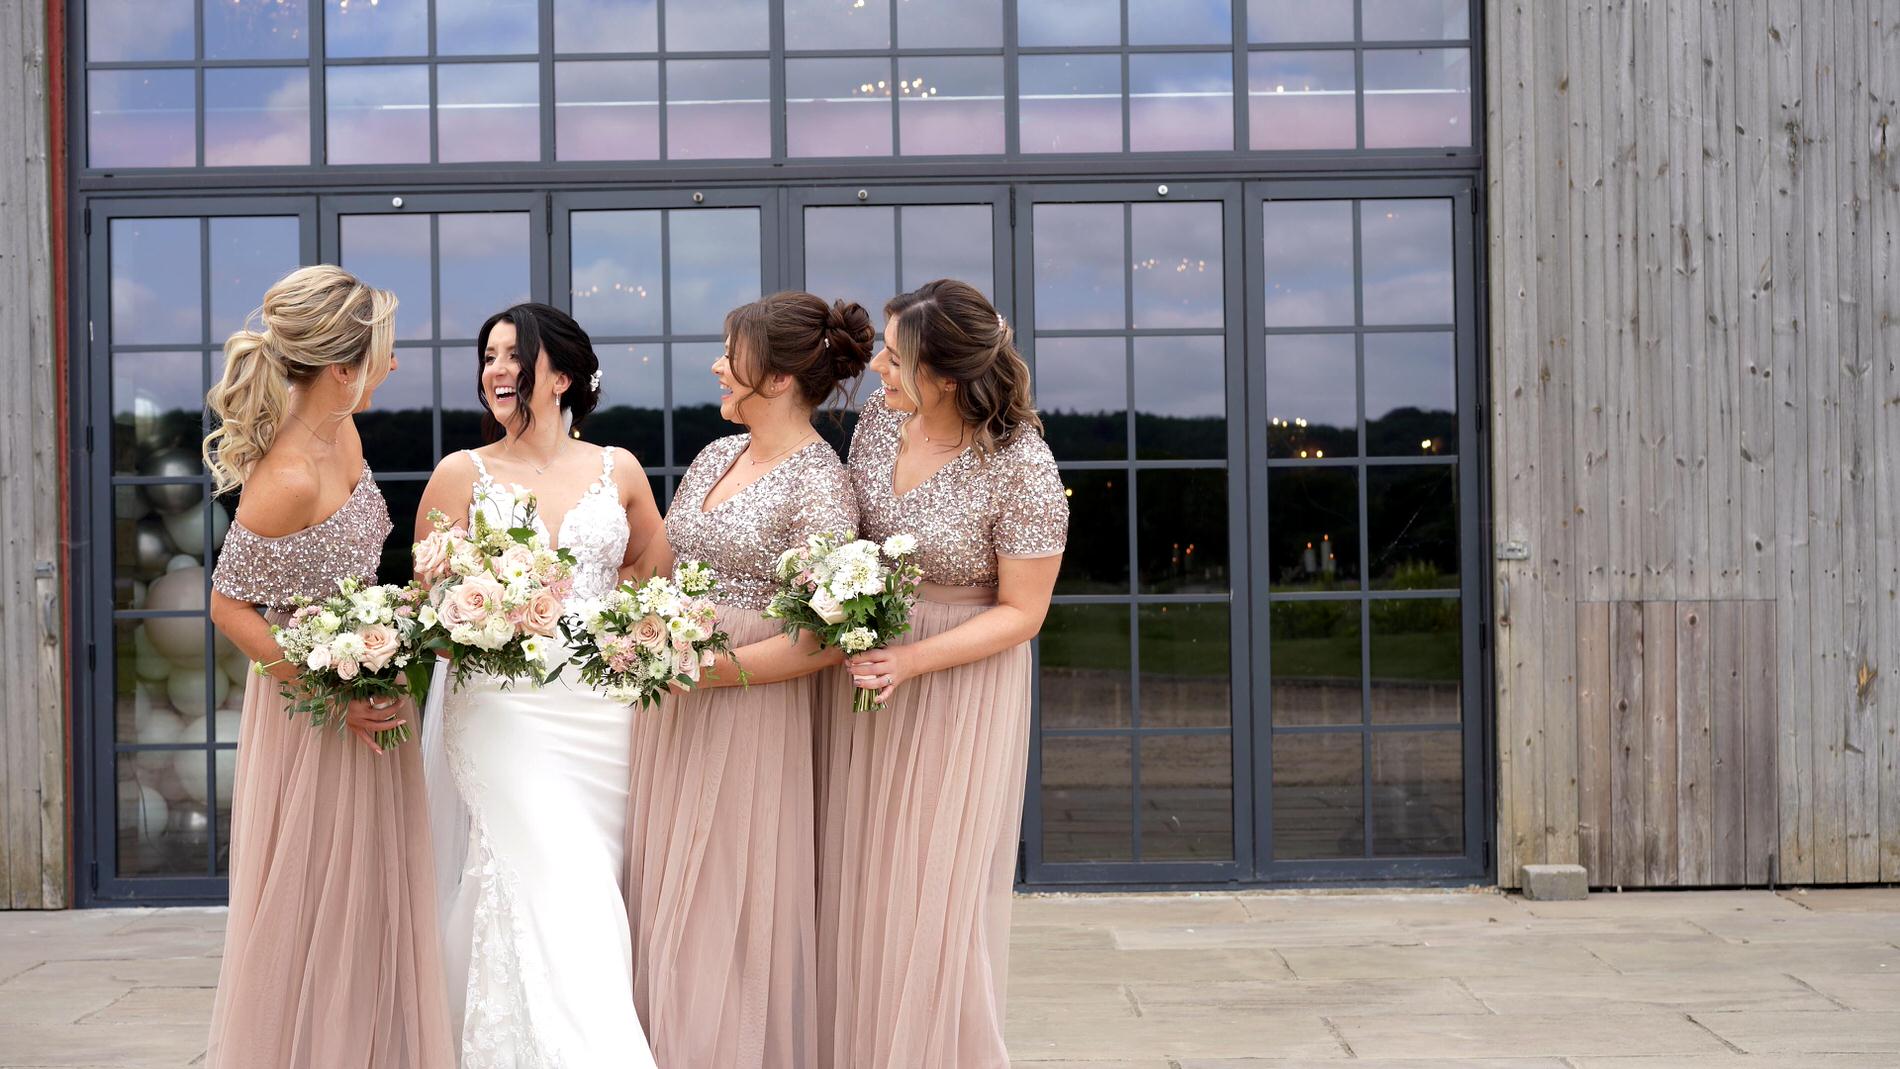 the bride laughs with her bridesmaids for the photographer and videographer